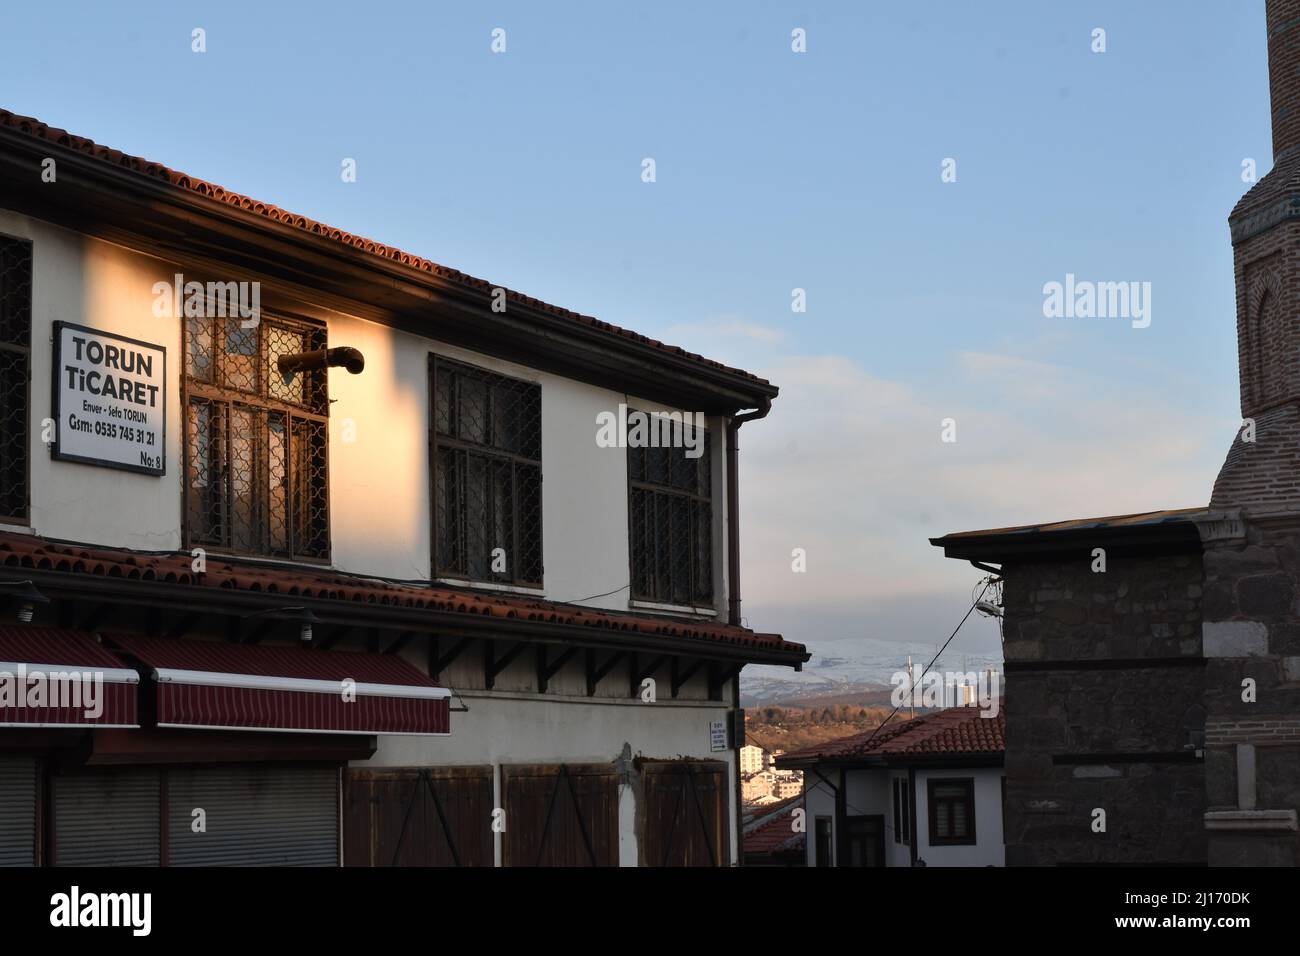 Ankara - Castle Area - Old Town (with the city of Ankara and snow-capped mountains in the background) Stock Photo